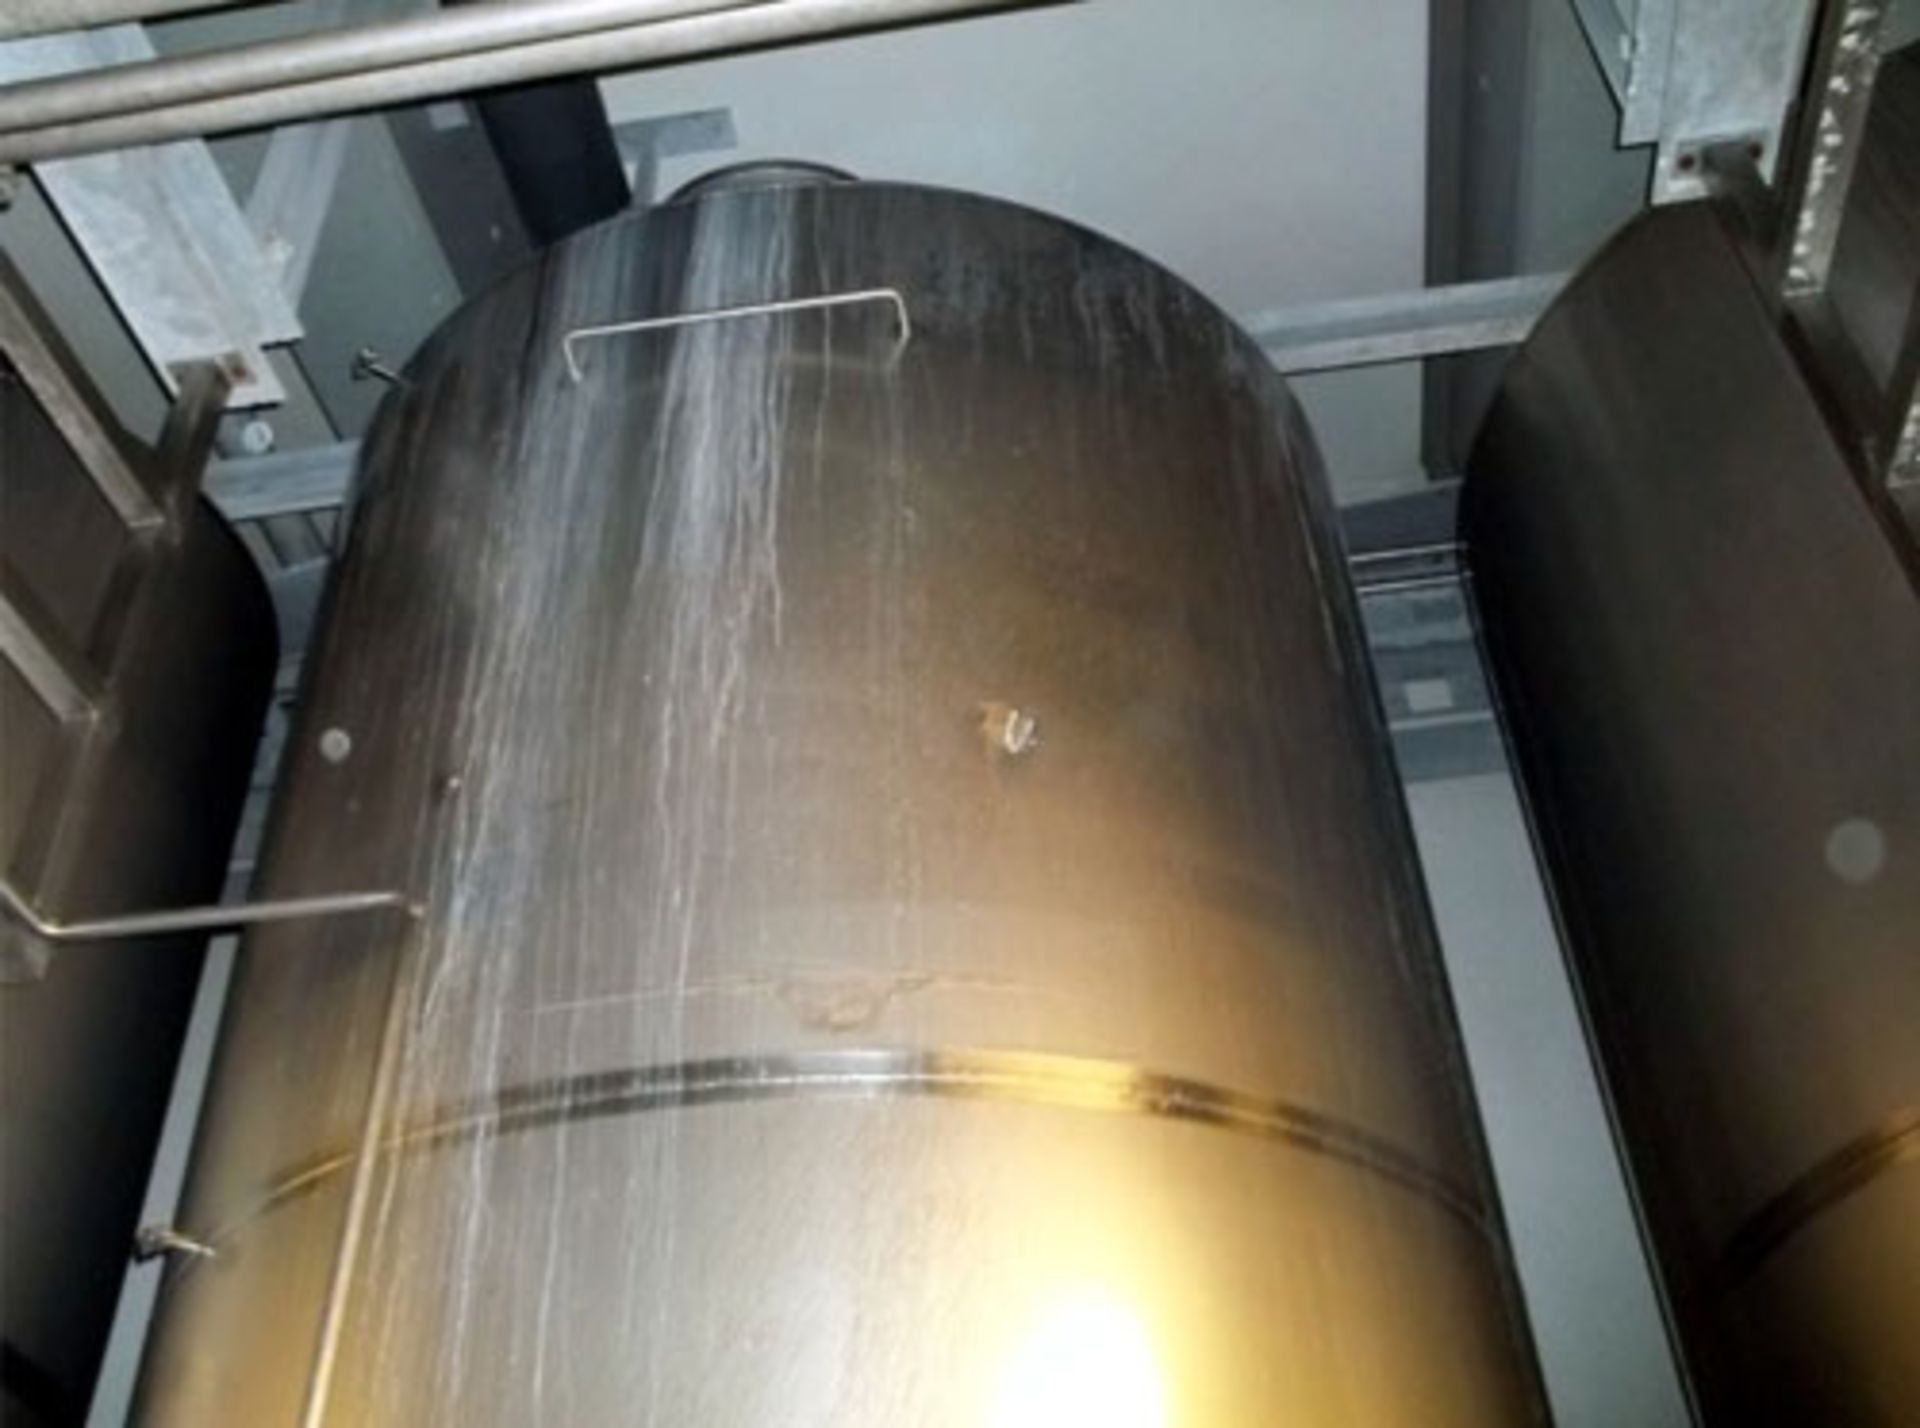 Alfa-Laval Tank, 10000 Liter (2641 Gallon), Type TV, Stainless Steel, Vertical. Coned bottom. - Image 2 of 3